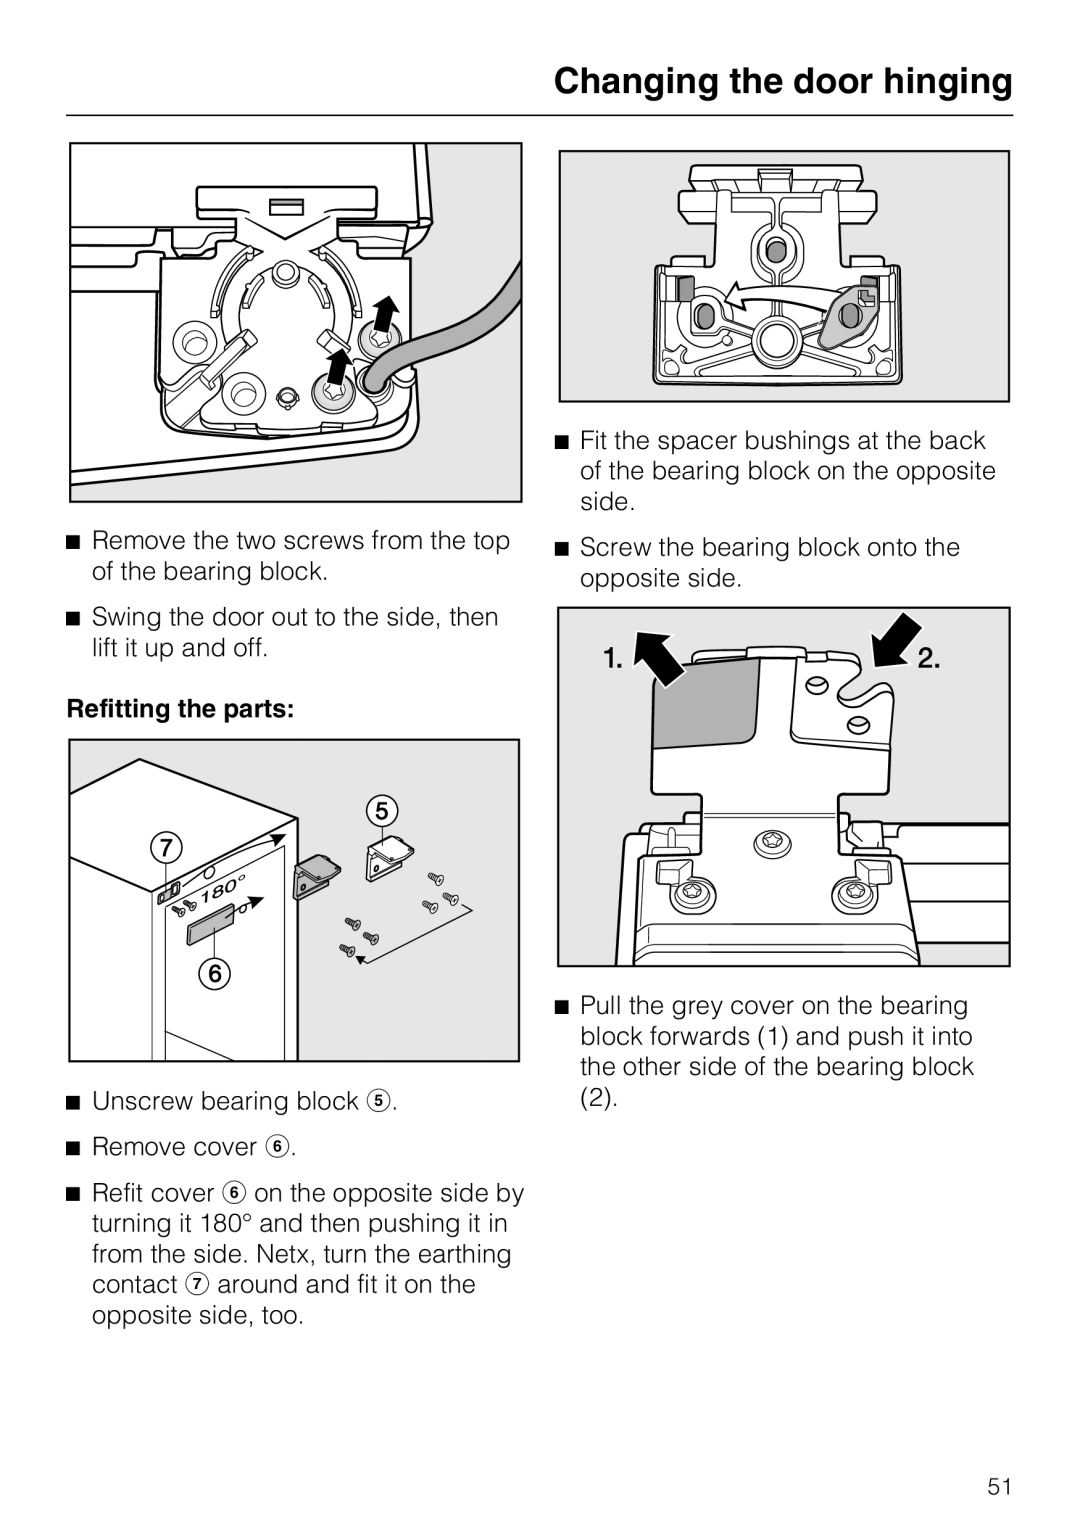 Miele KFN 8996 SDE ED-1, KFN 8995 SD ED-1 installation instructions Refitting the parts, Changing the door hinging 